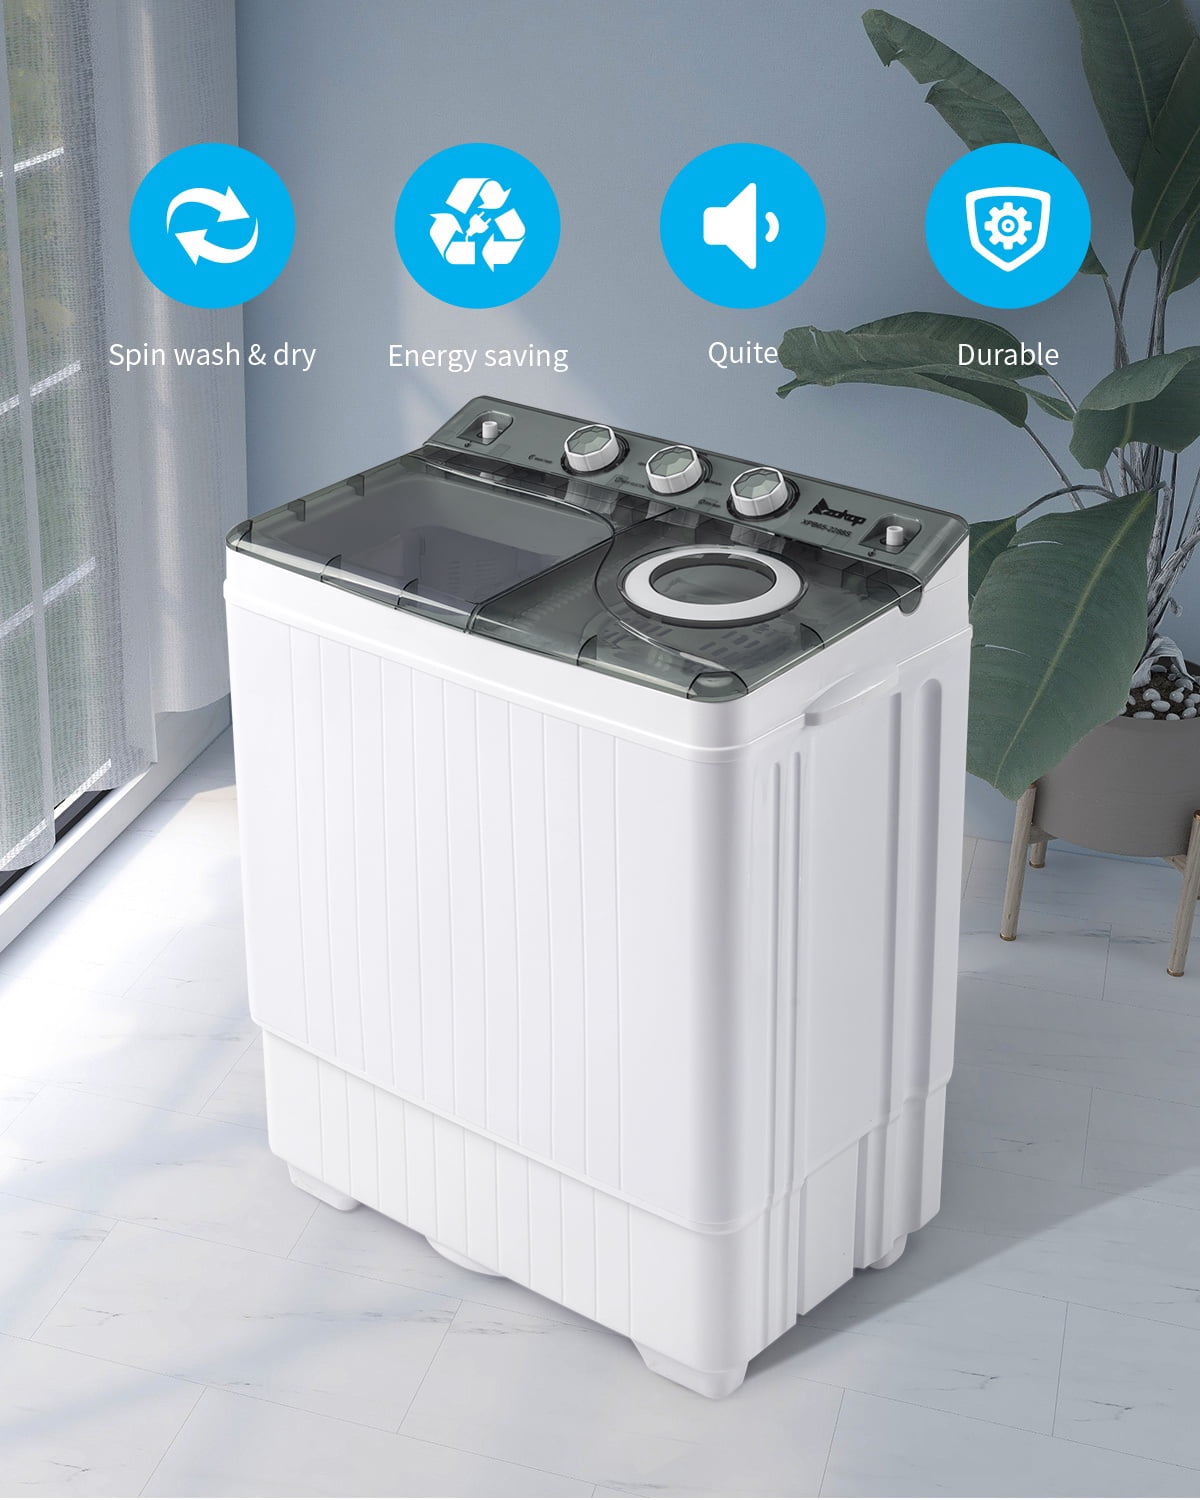 Winado 26LBS Portable Washing Machine, Compact Mini Washer Machine & Dryer  Combo, Built-in Gravity Drain, Small Twin Tub Washer with Spin Cycle for